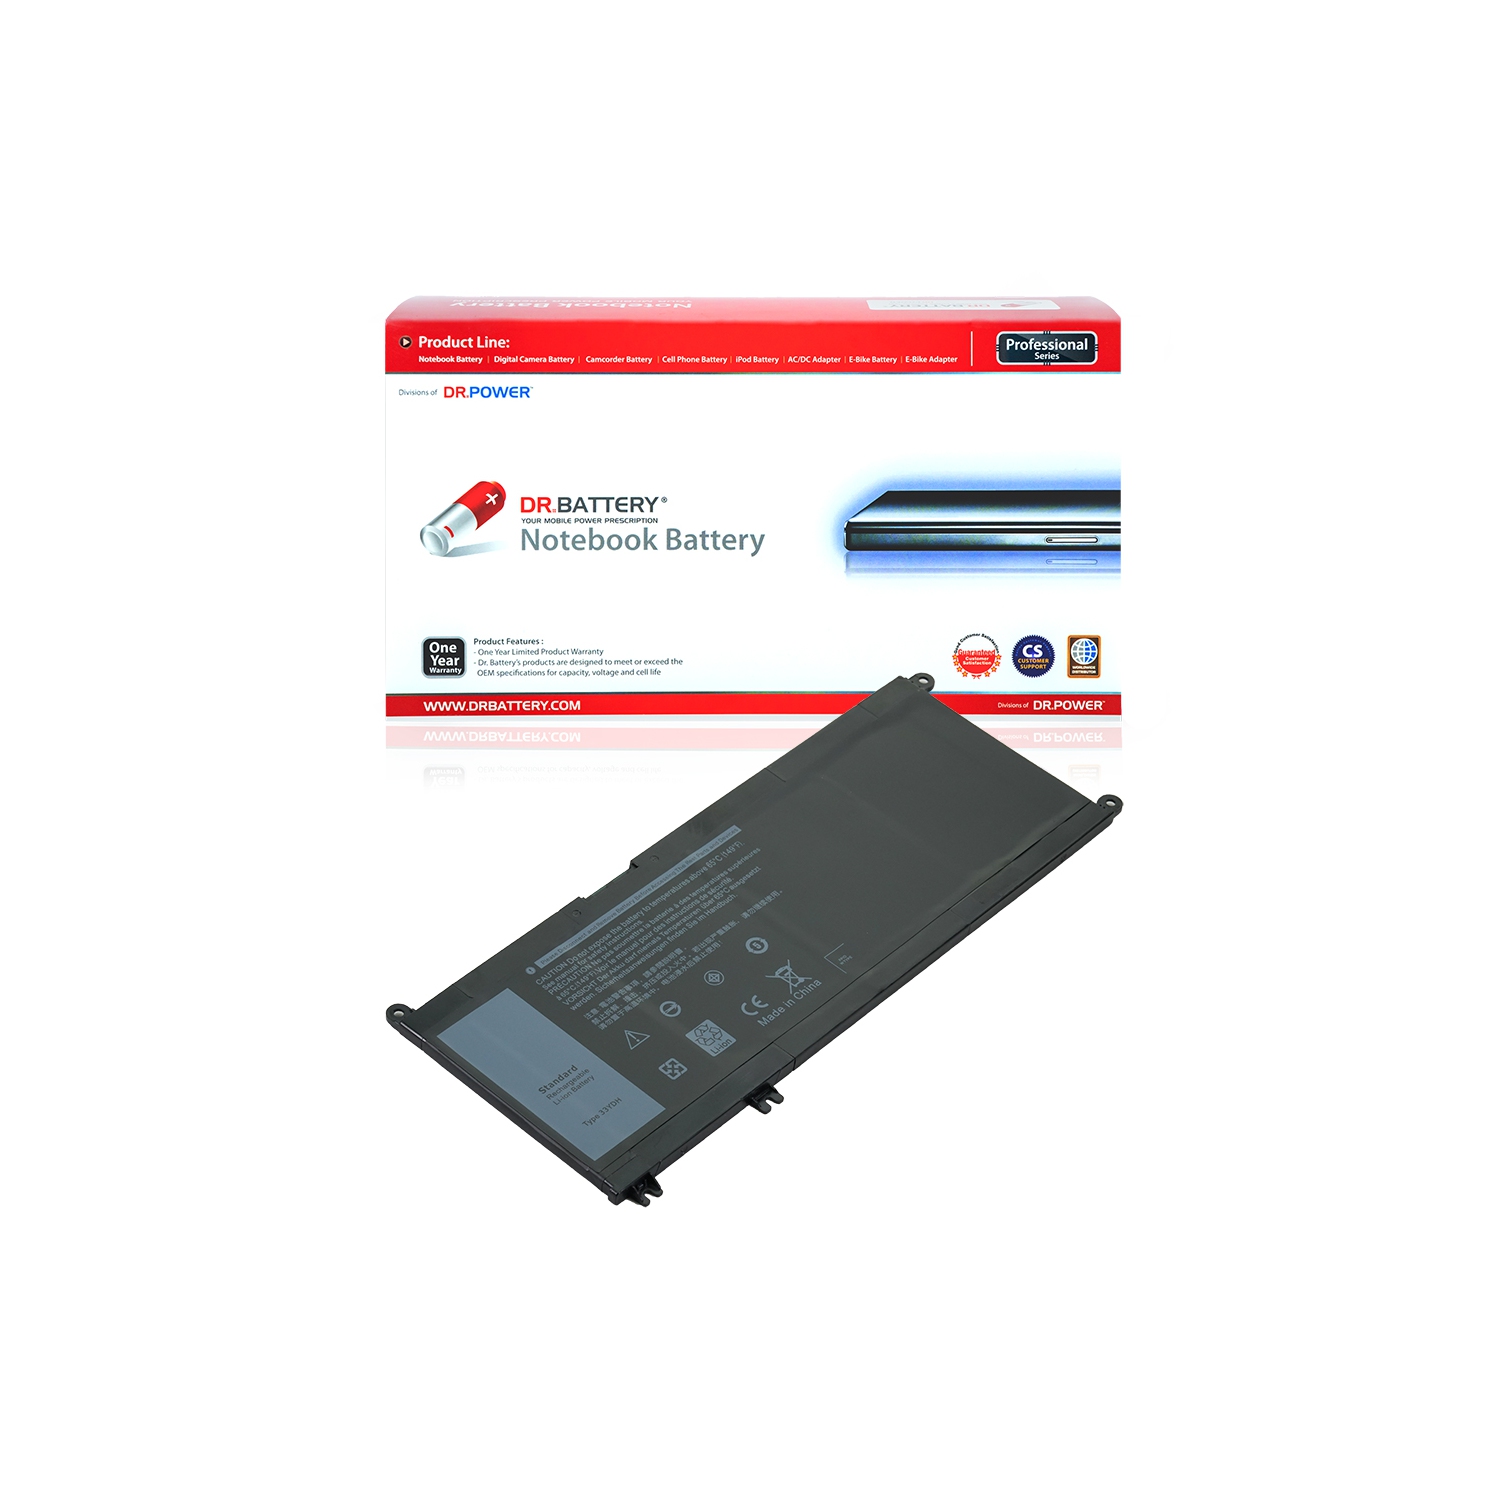 DR. BATTERY - Replacement for Dell G3 17 G5 15 5587 / Inspiron 17 7773 / Inspiron 17 7778 / 33YDH / 81PF3 / PVHT1 / 081PF3